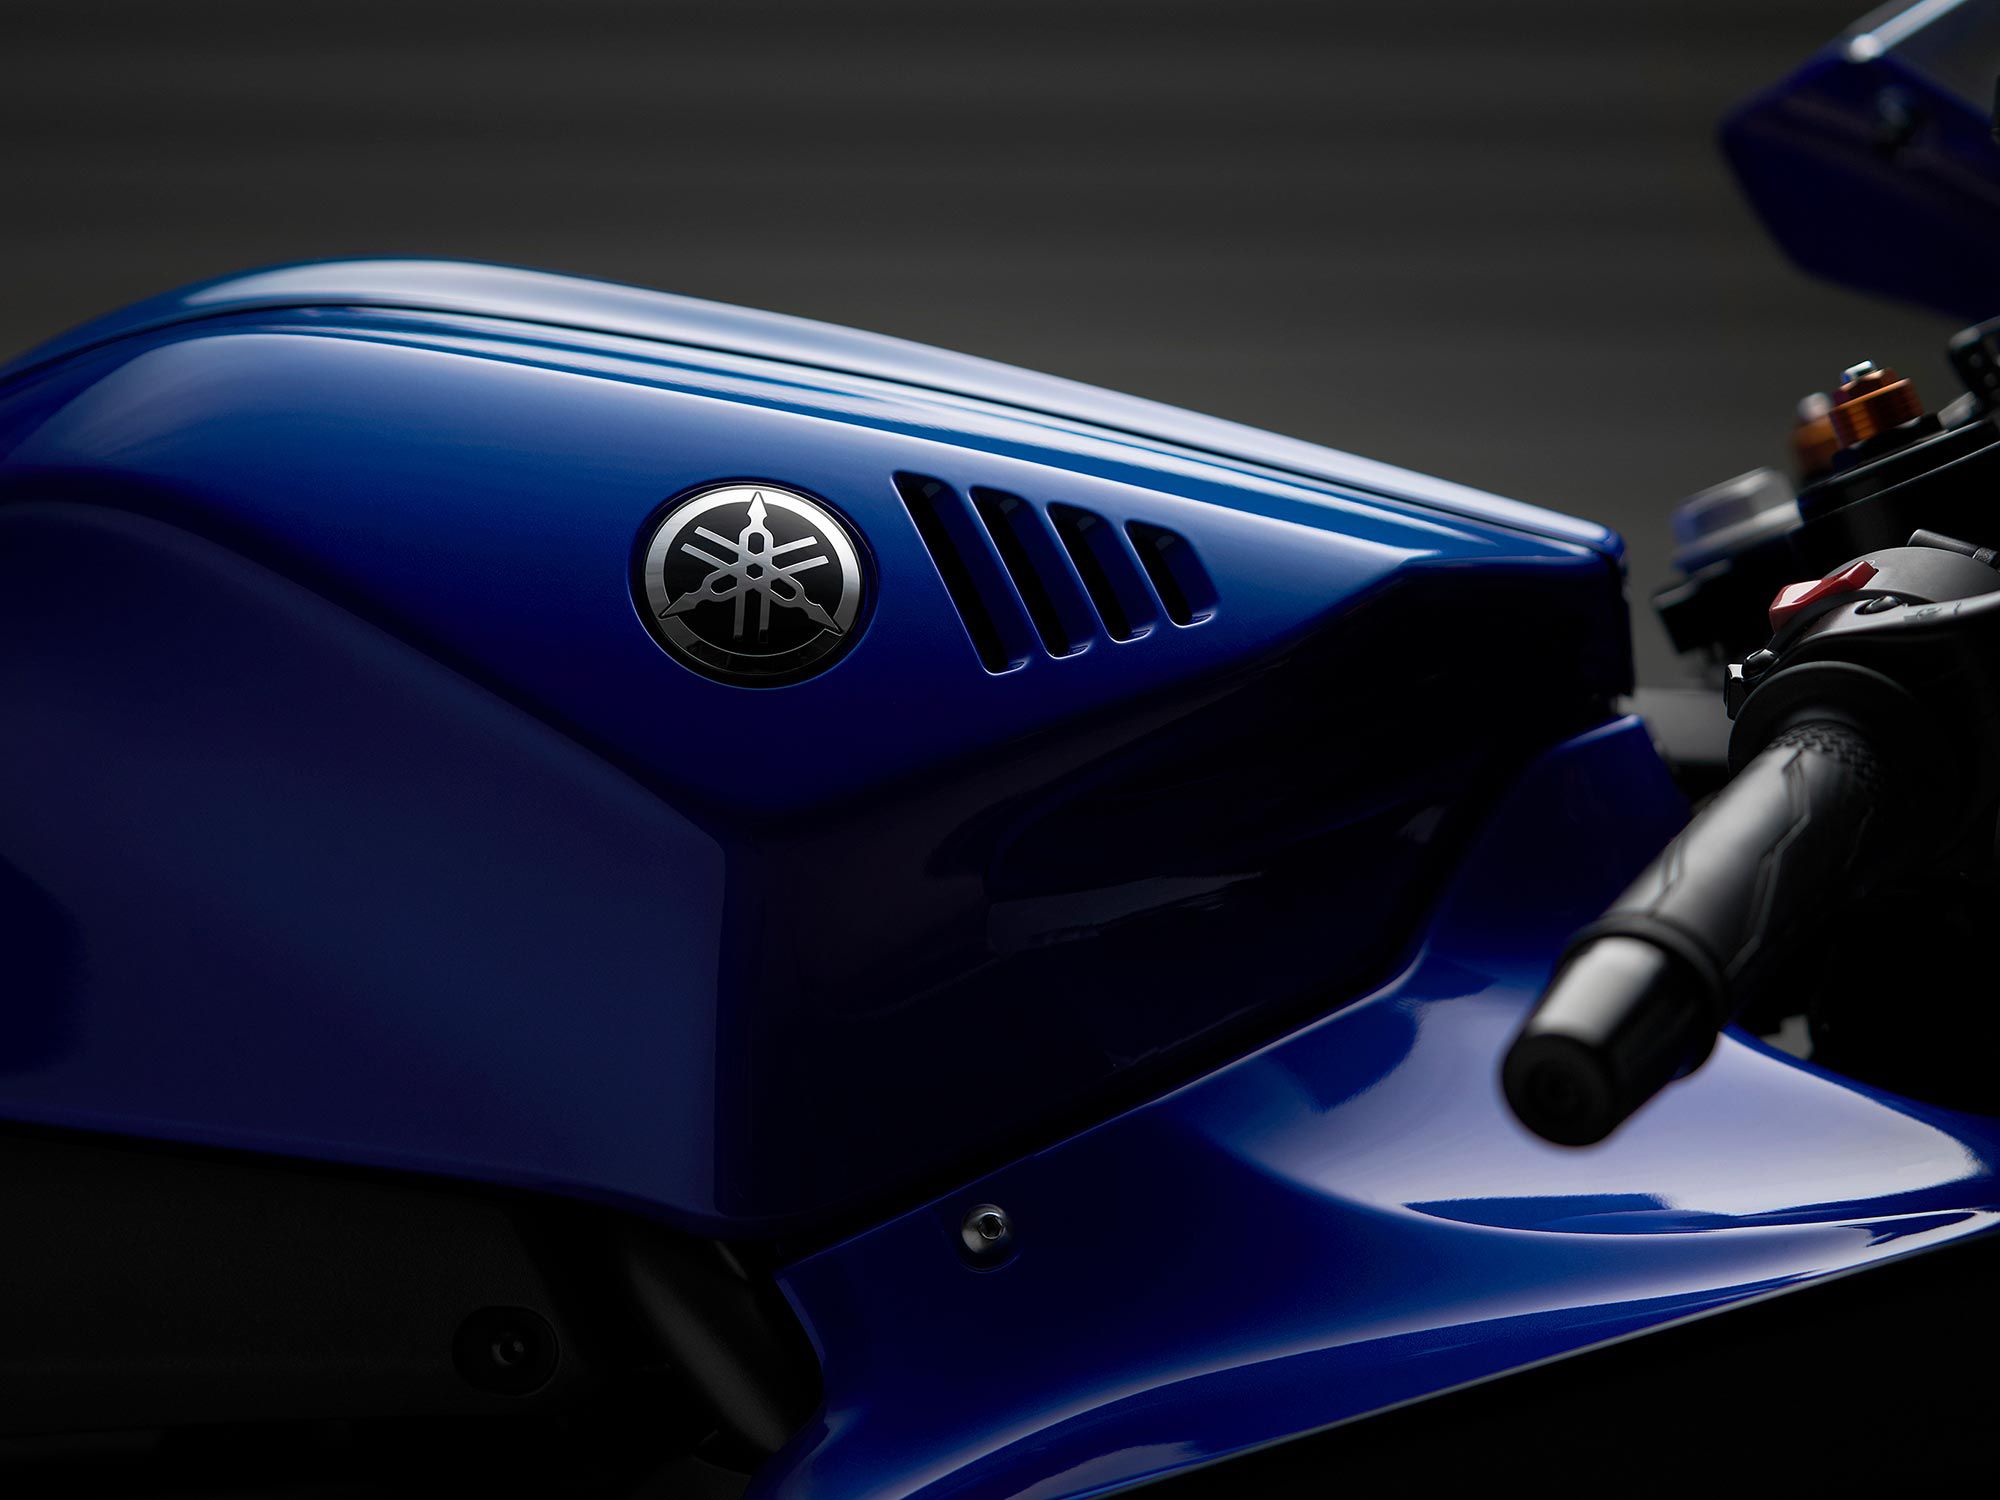 The YZR-M1’s signature fish gills atop of the fuel tank are also used on the YZF-R7.